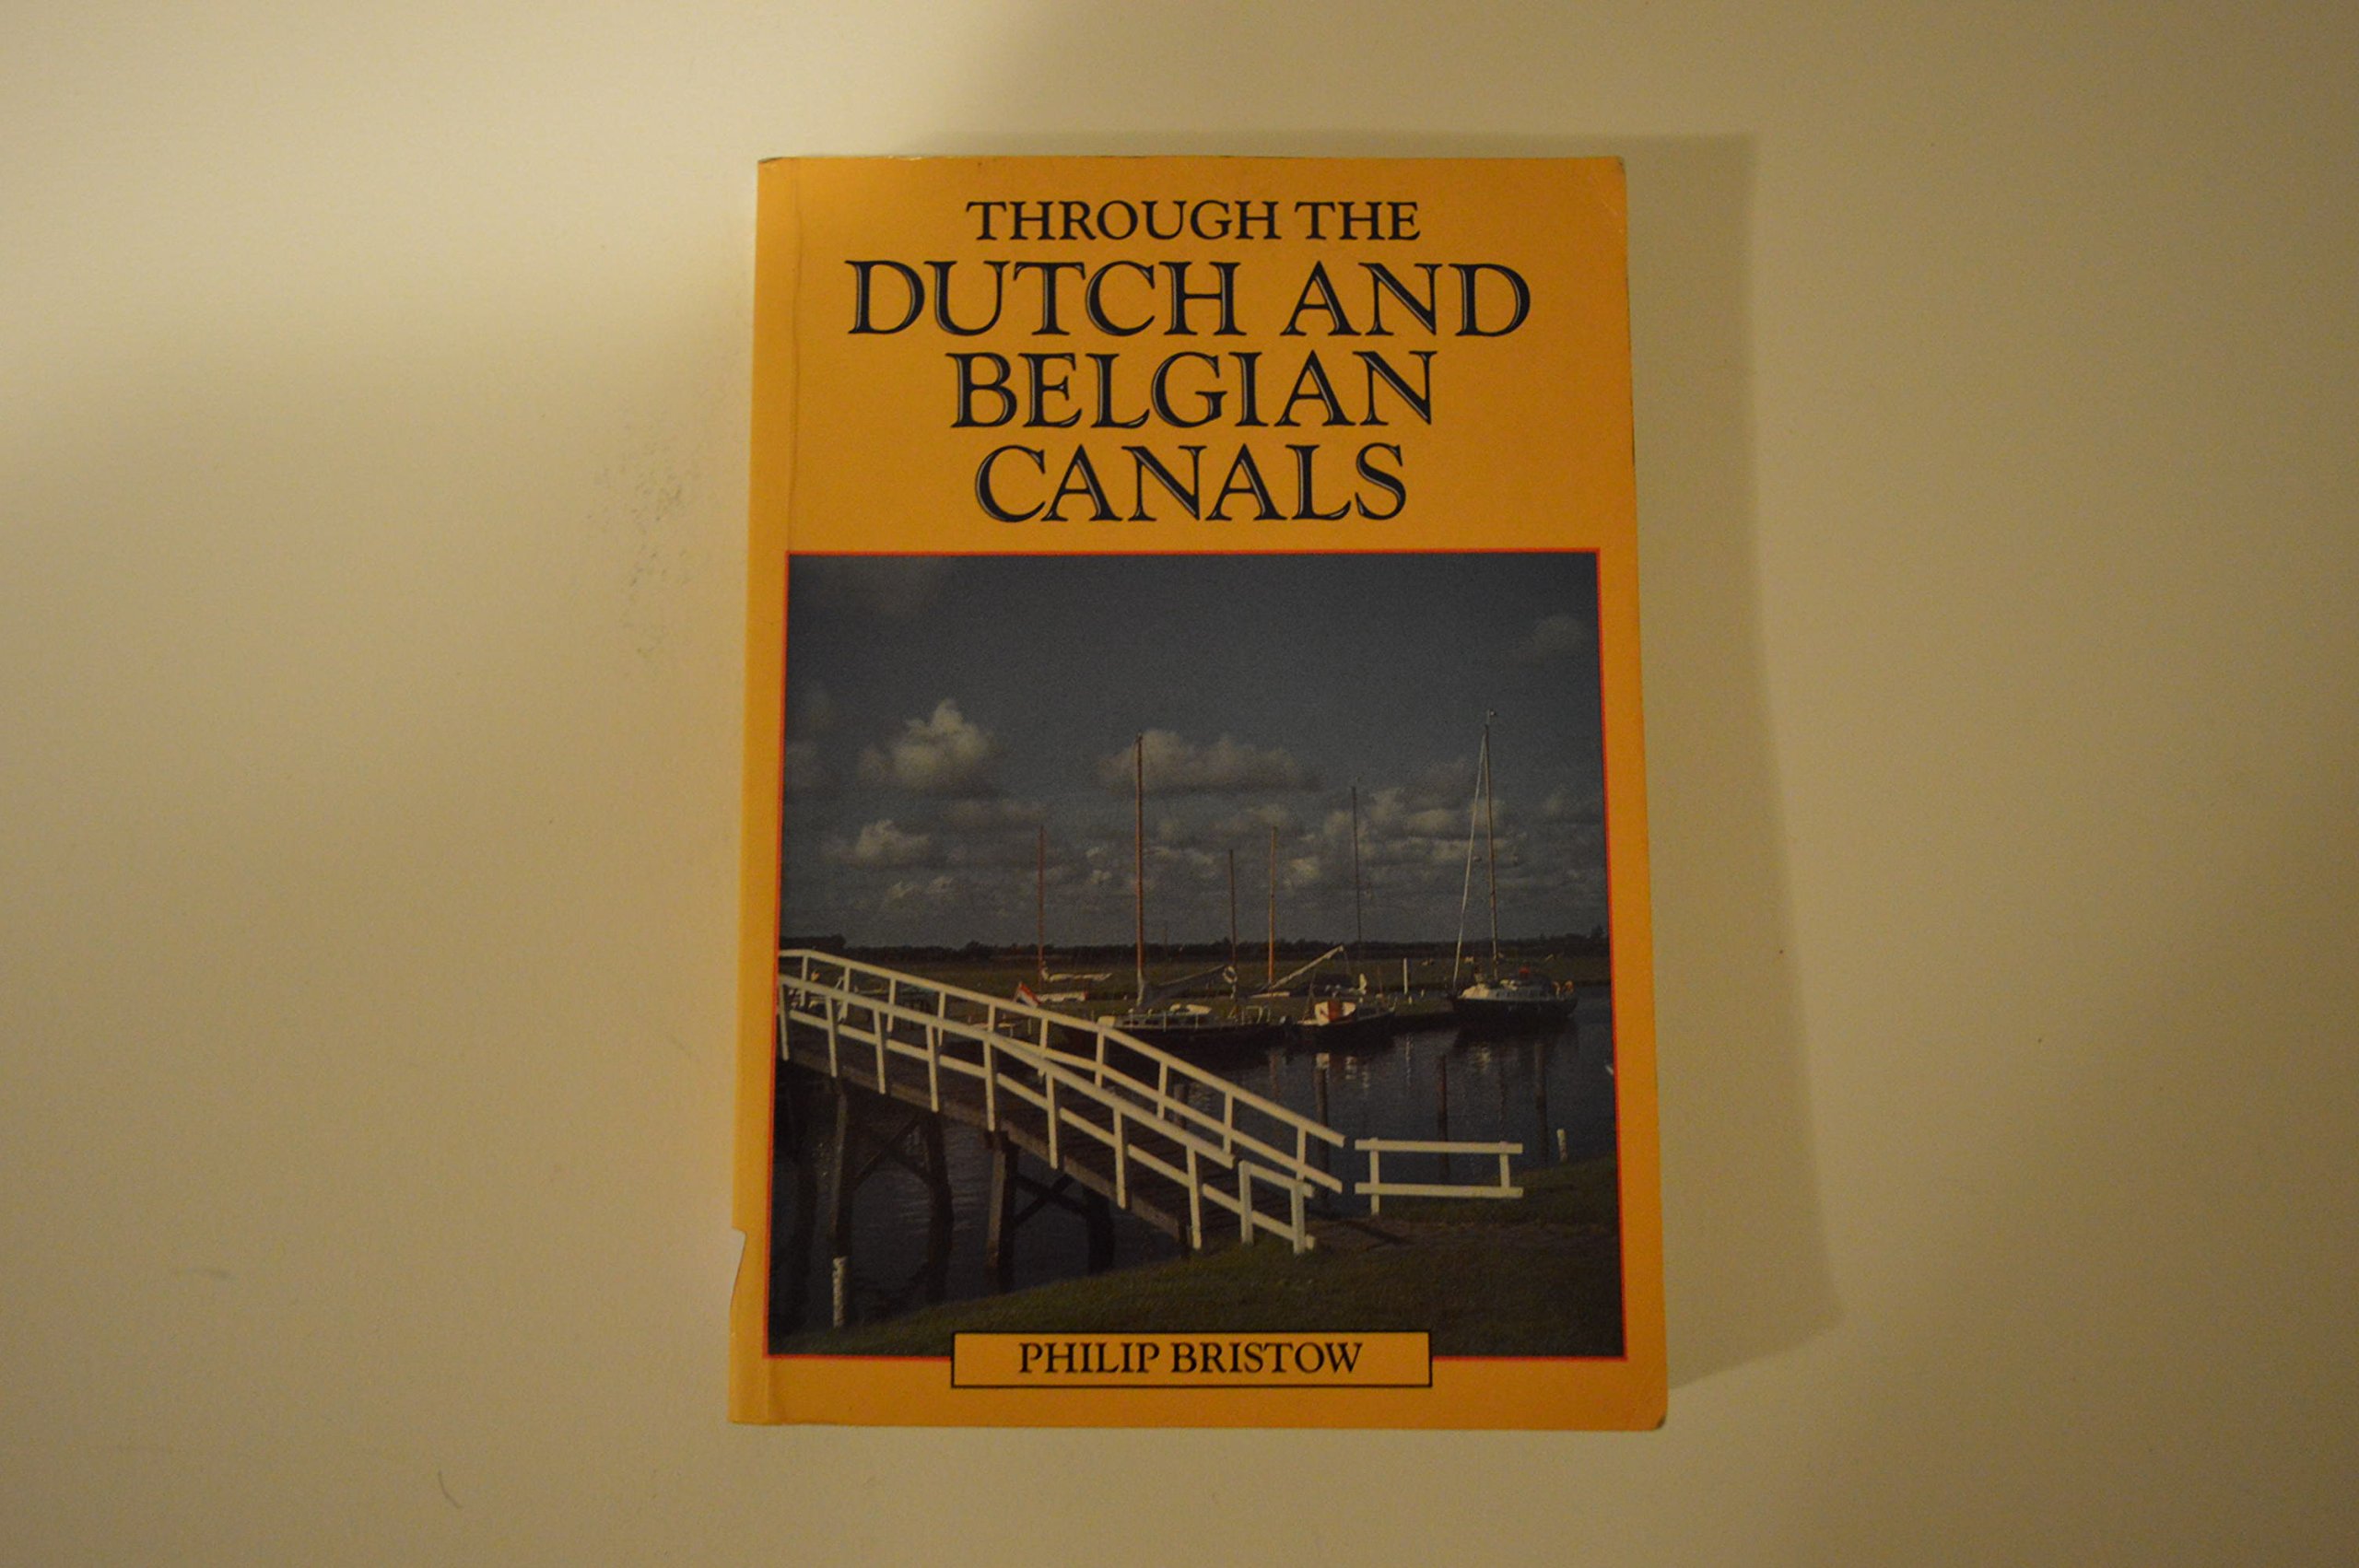 Through the dutch and belgian canals